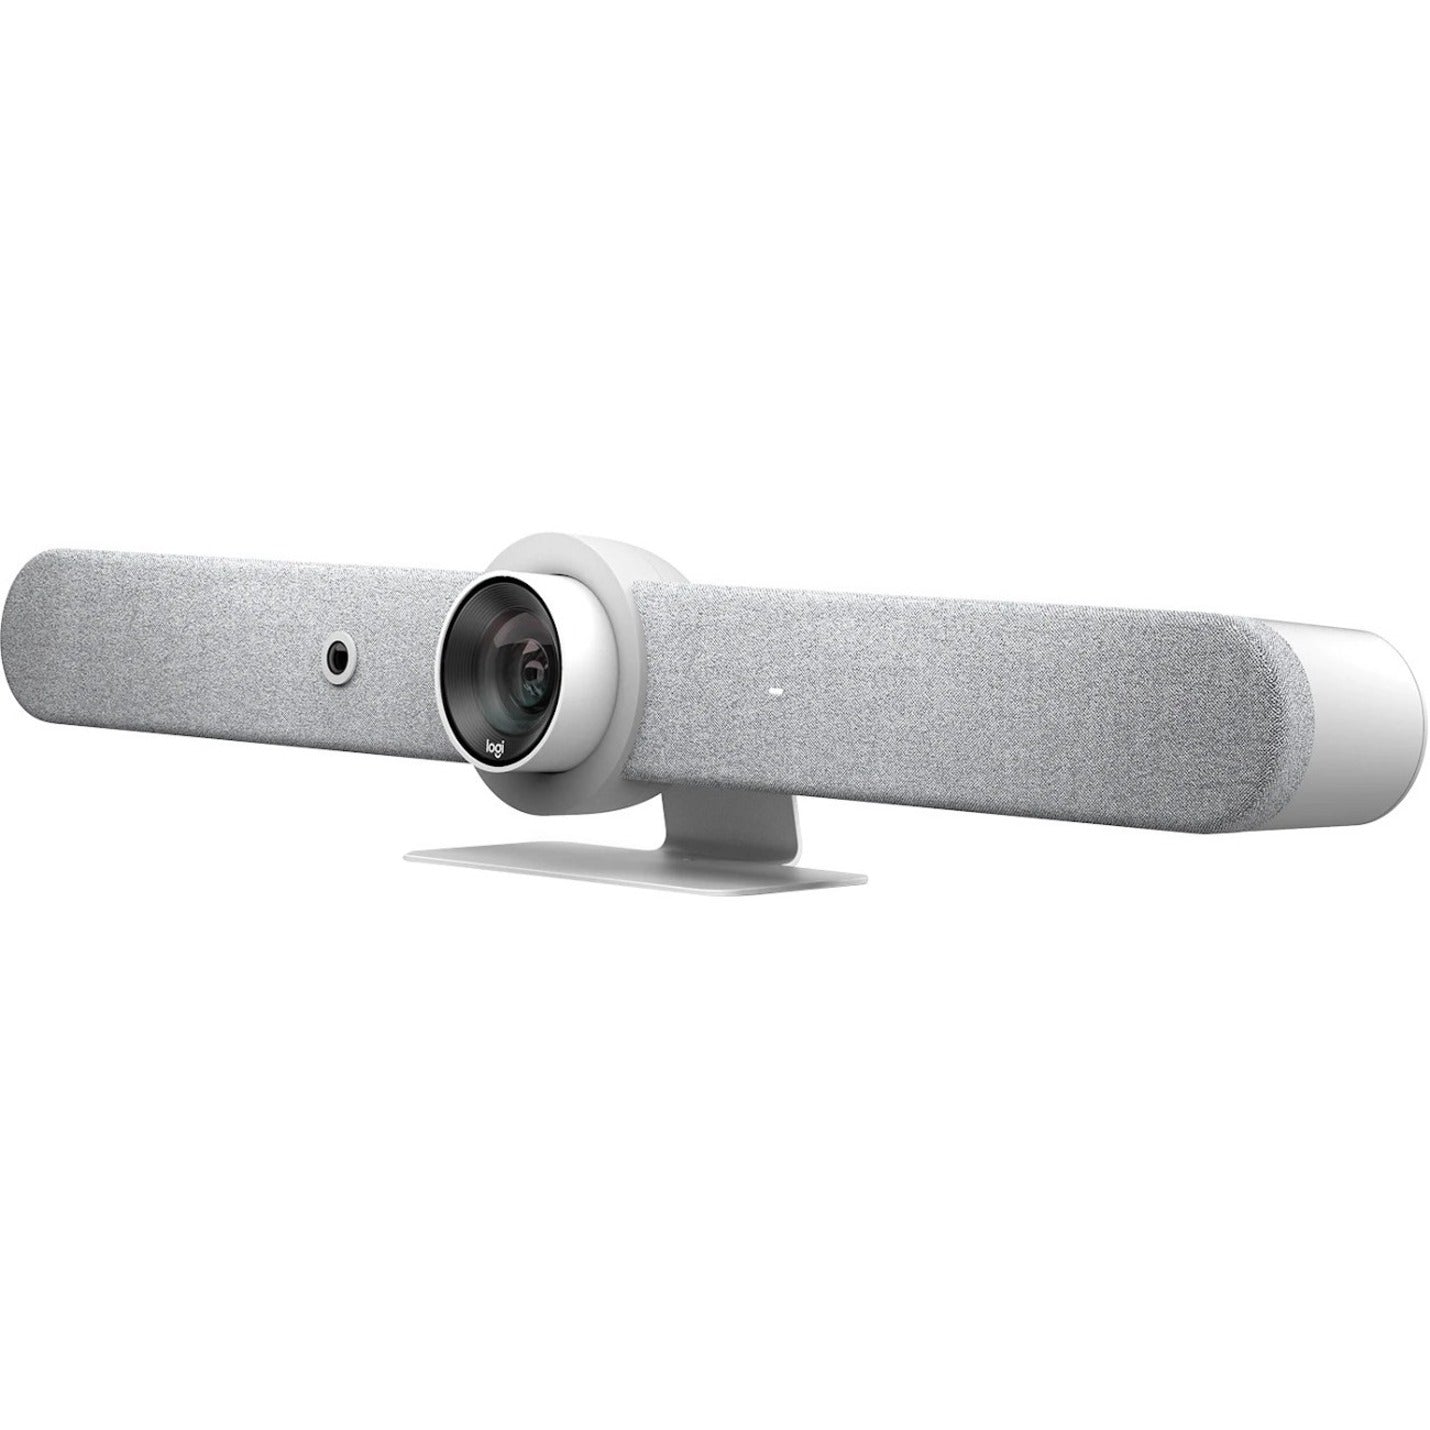 Logitech 960-001320 RALLY BAR Video Conferencing Camera, 30 fps, White, USB 3.0